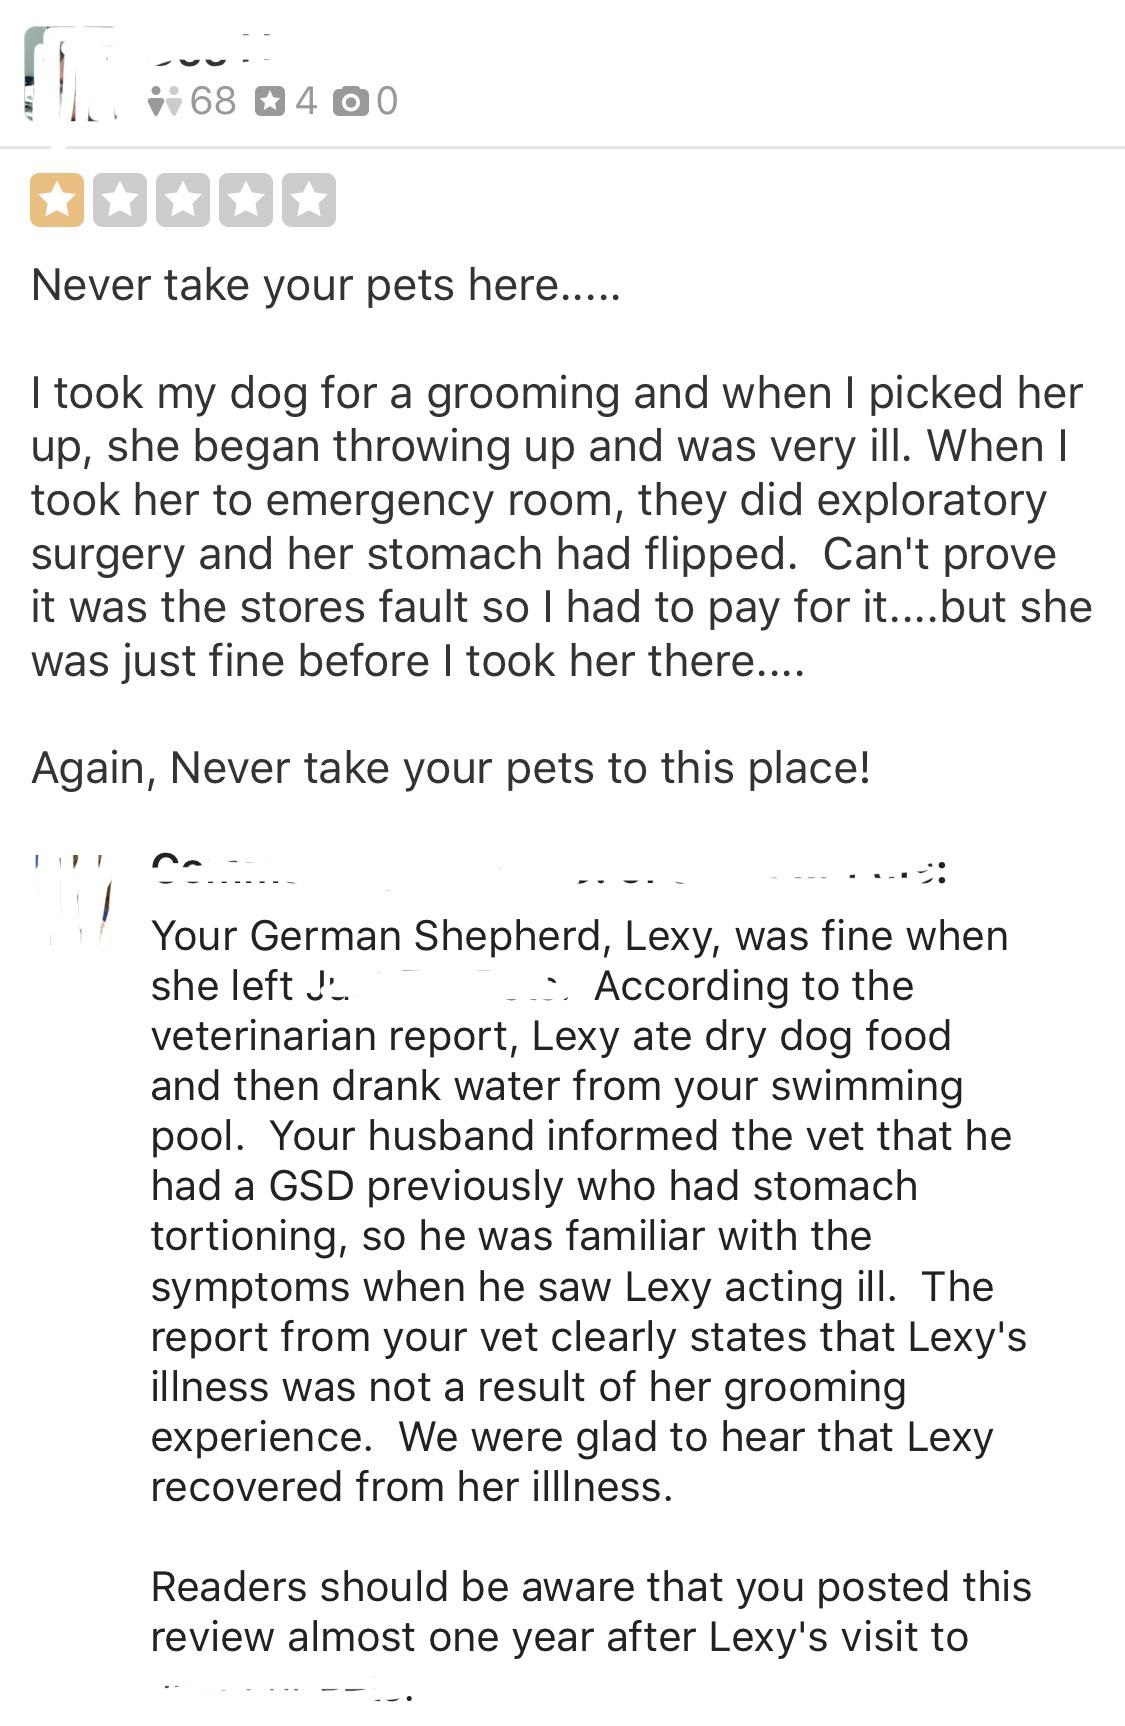 social media liars - Never take your pets here.... I took my dog for a grooming and when I picked her up, she began throwing up and was very ill. When I took her to emergency room, they did exploratory surgery and her stomach had flipped. Can't prove it w